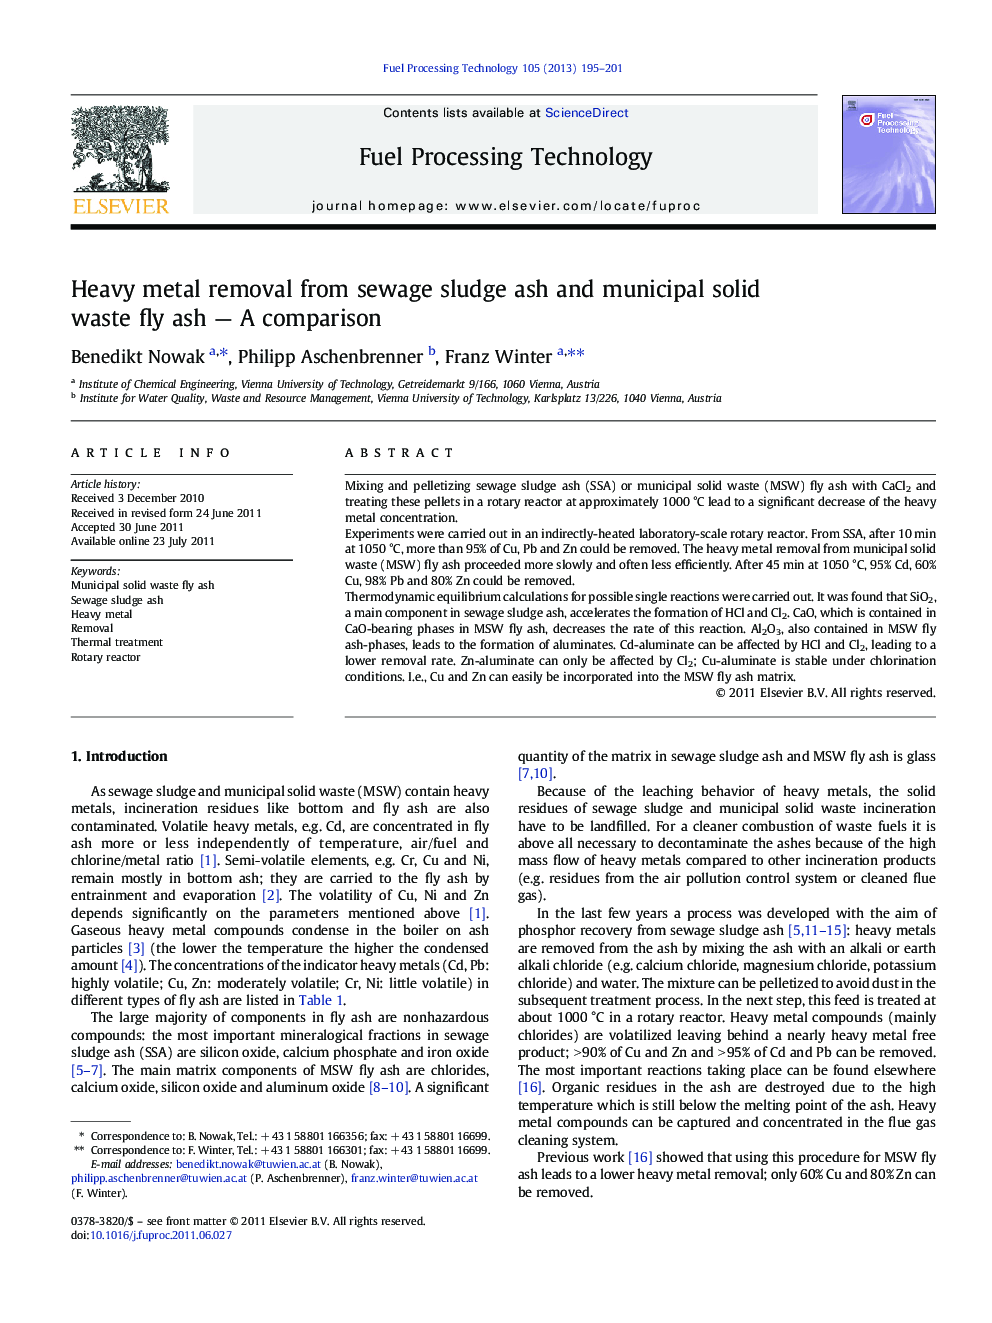 Heavy metal removal from sewage sludge ash and municipal solid waste fly ash — A comparison